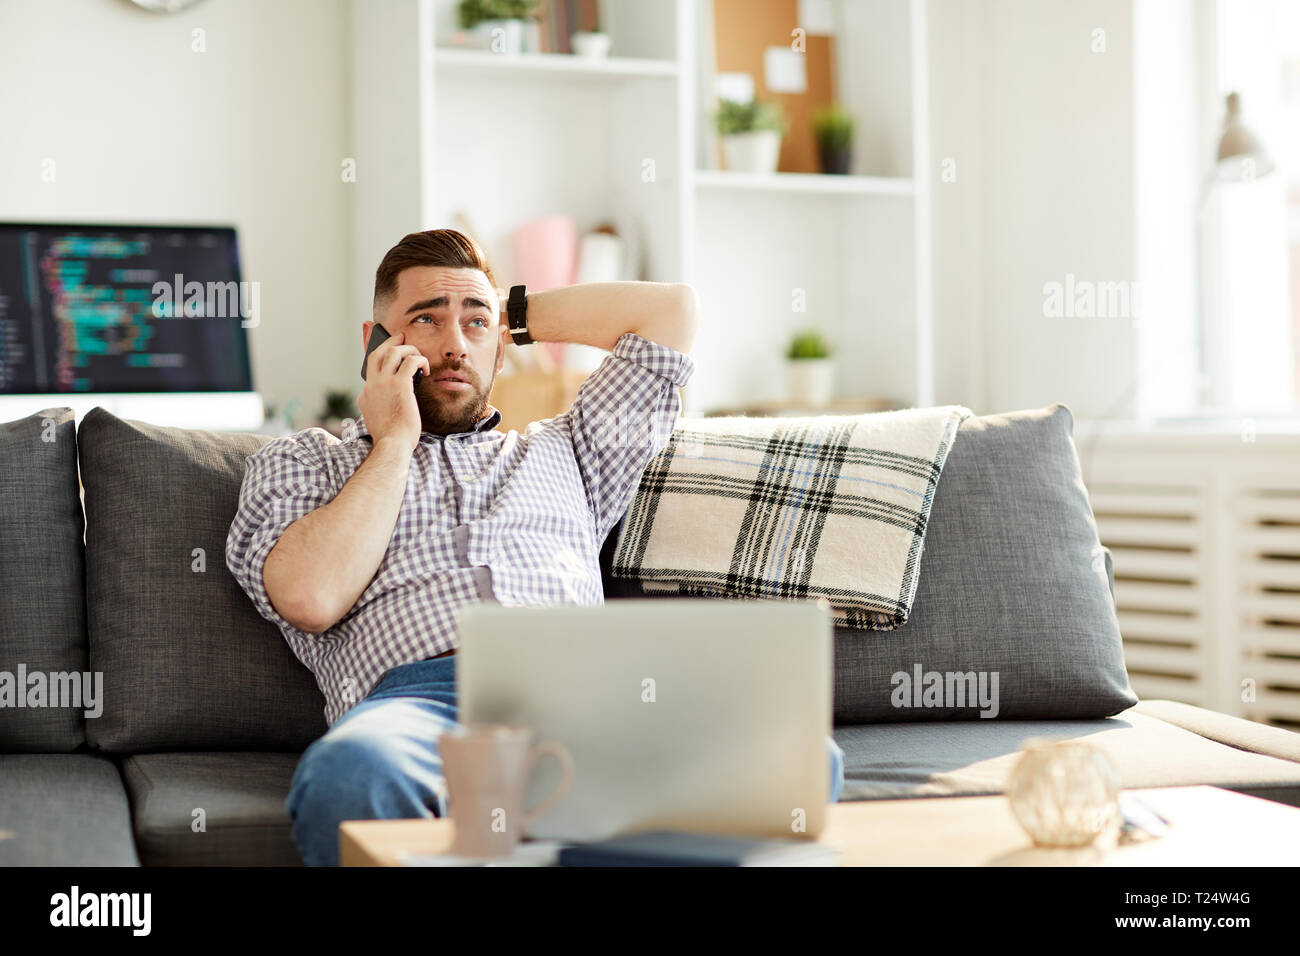 Man with modern gadgets Stock Photo